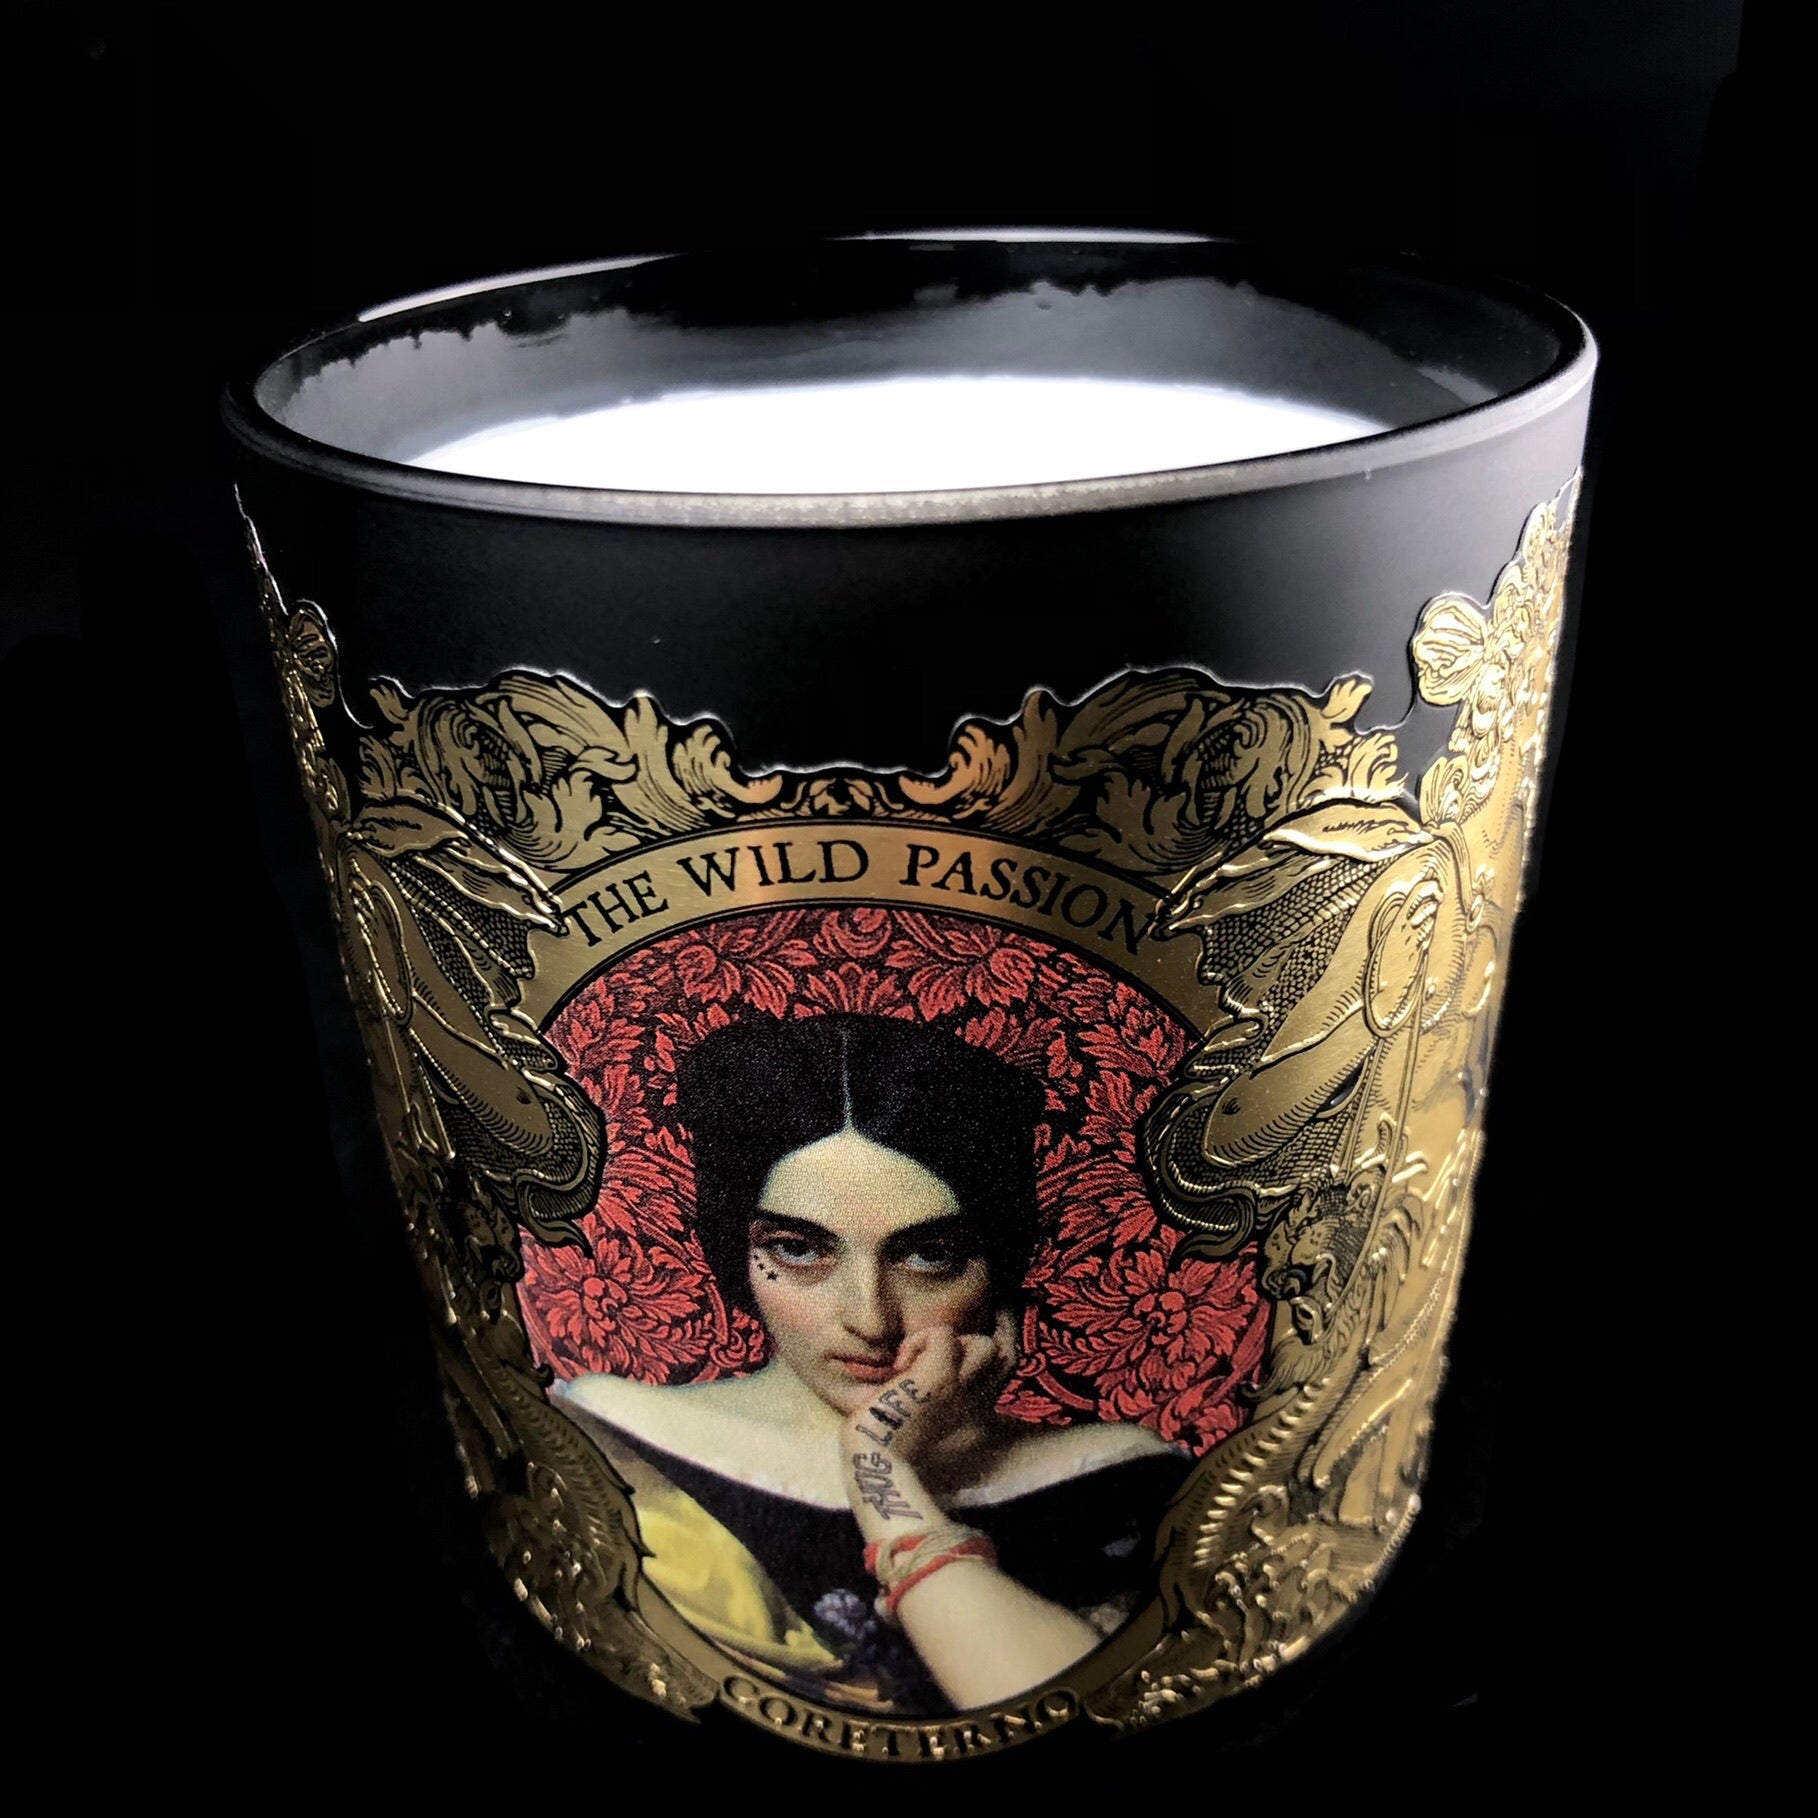 The Wild Passion Candle